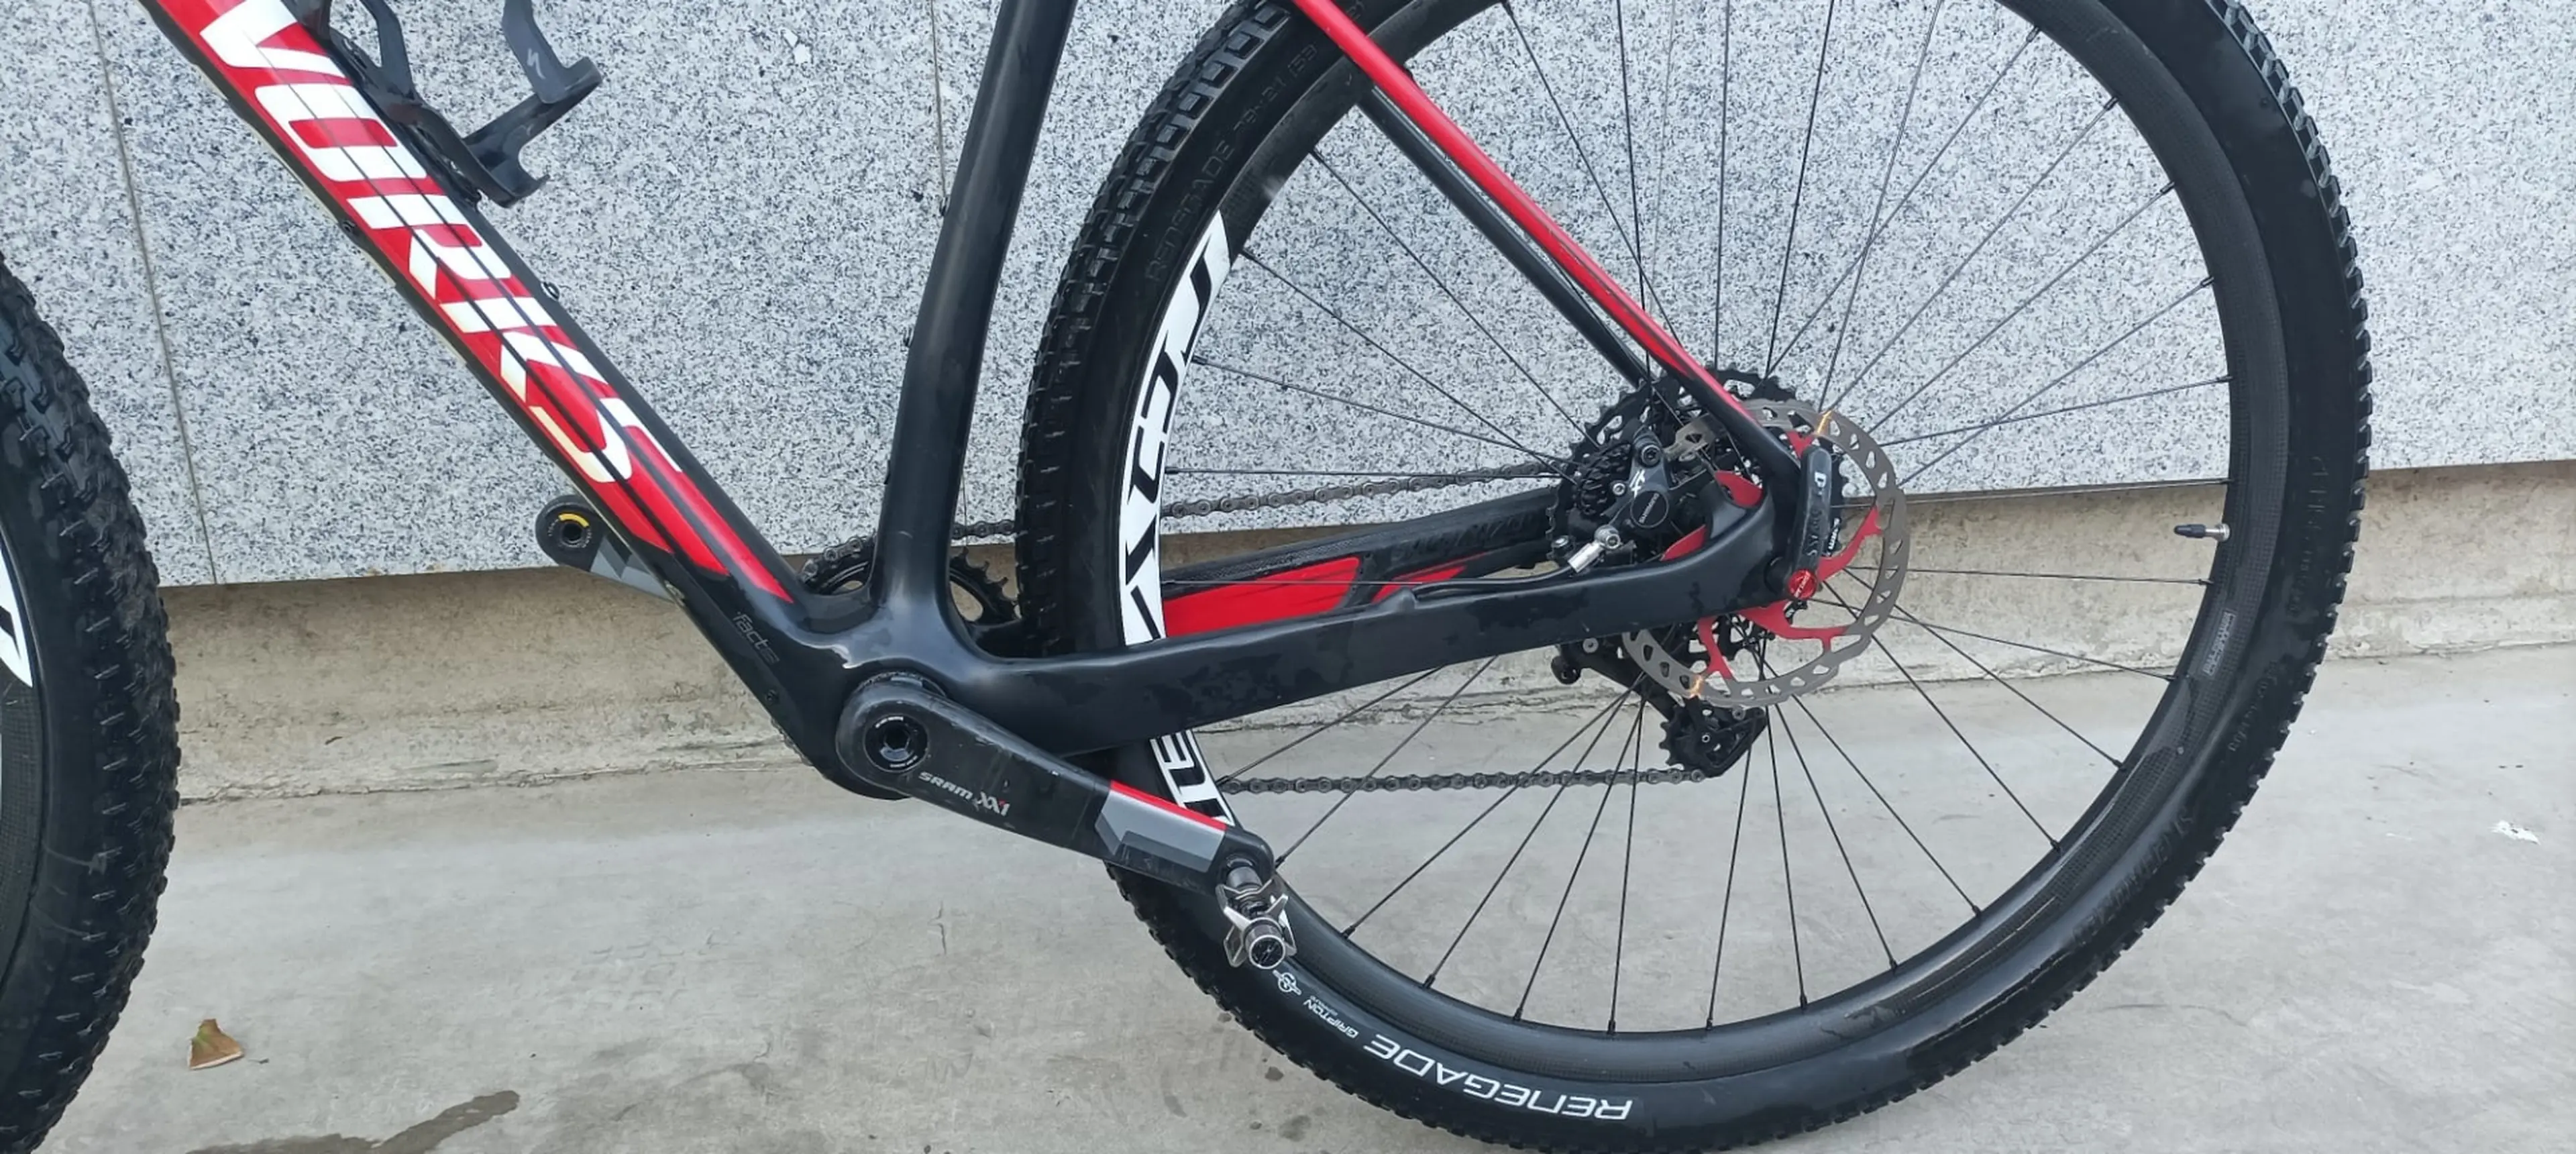 7. Specialized stumpjumper S-Works